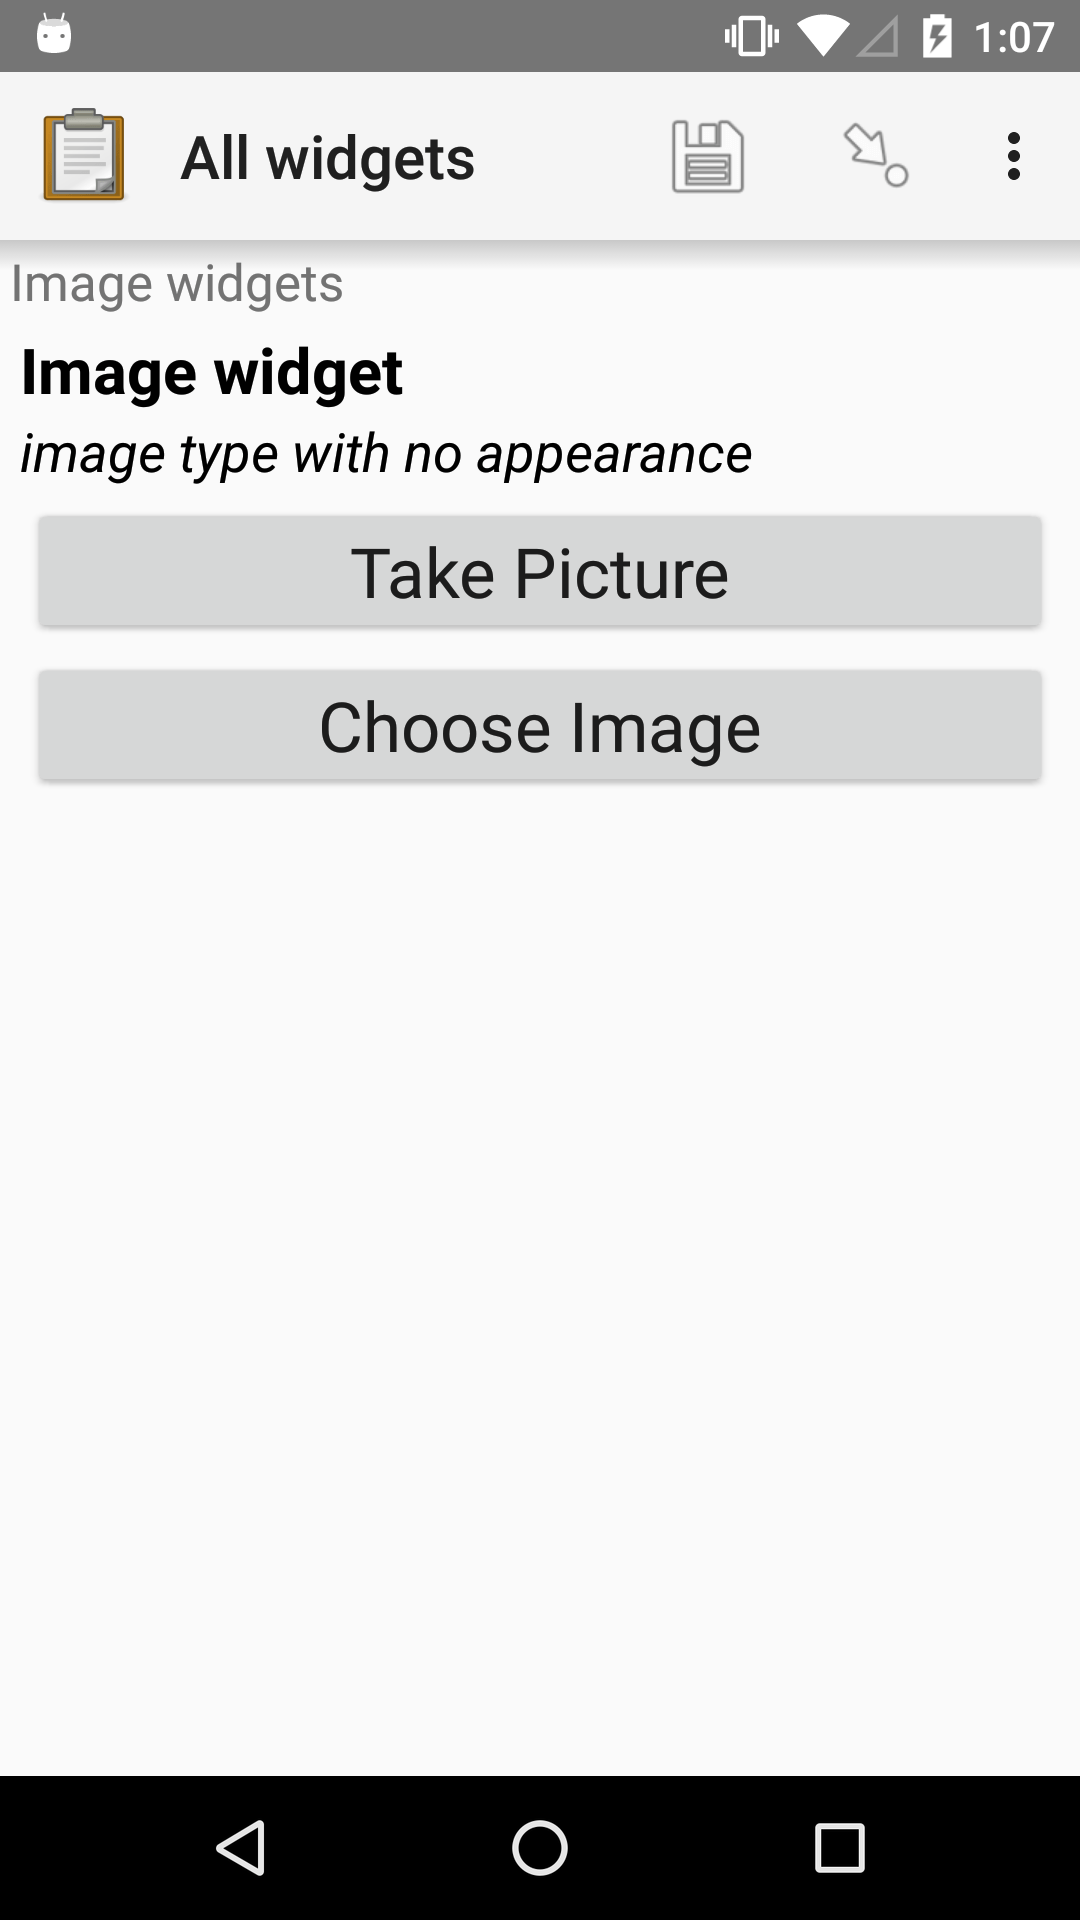 The default Image form widget, as displayed in the ODK Collect app on an Android phone. The question text is, "Image Widget." The hint text is, "image type with no appearance." Below that are two buttons: "Take Picture" and "Choose Image." Above the question text is the form group name "Image widgets."